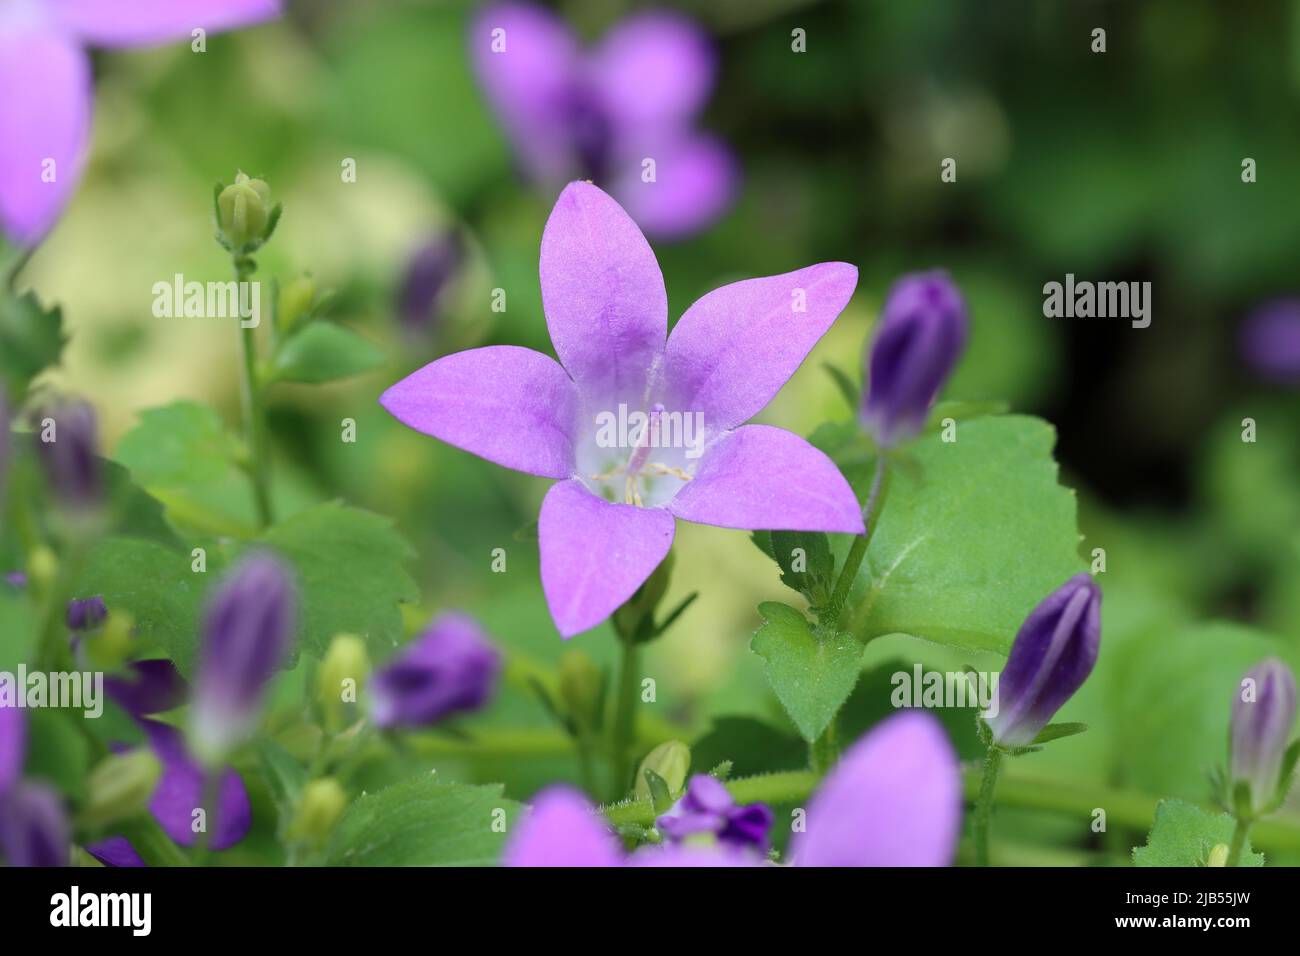 close-up of beautiful fully blooming violet-blue bellflower of the campanula portenschlagiana variety in a flower bed, selective focus, blurred natura Stock Photo